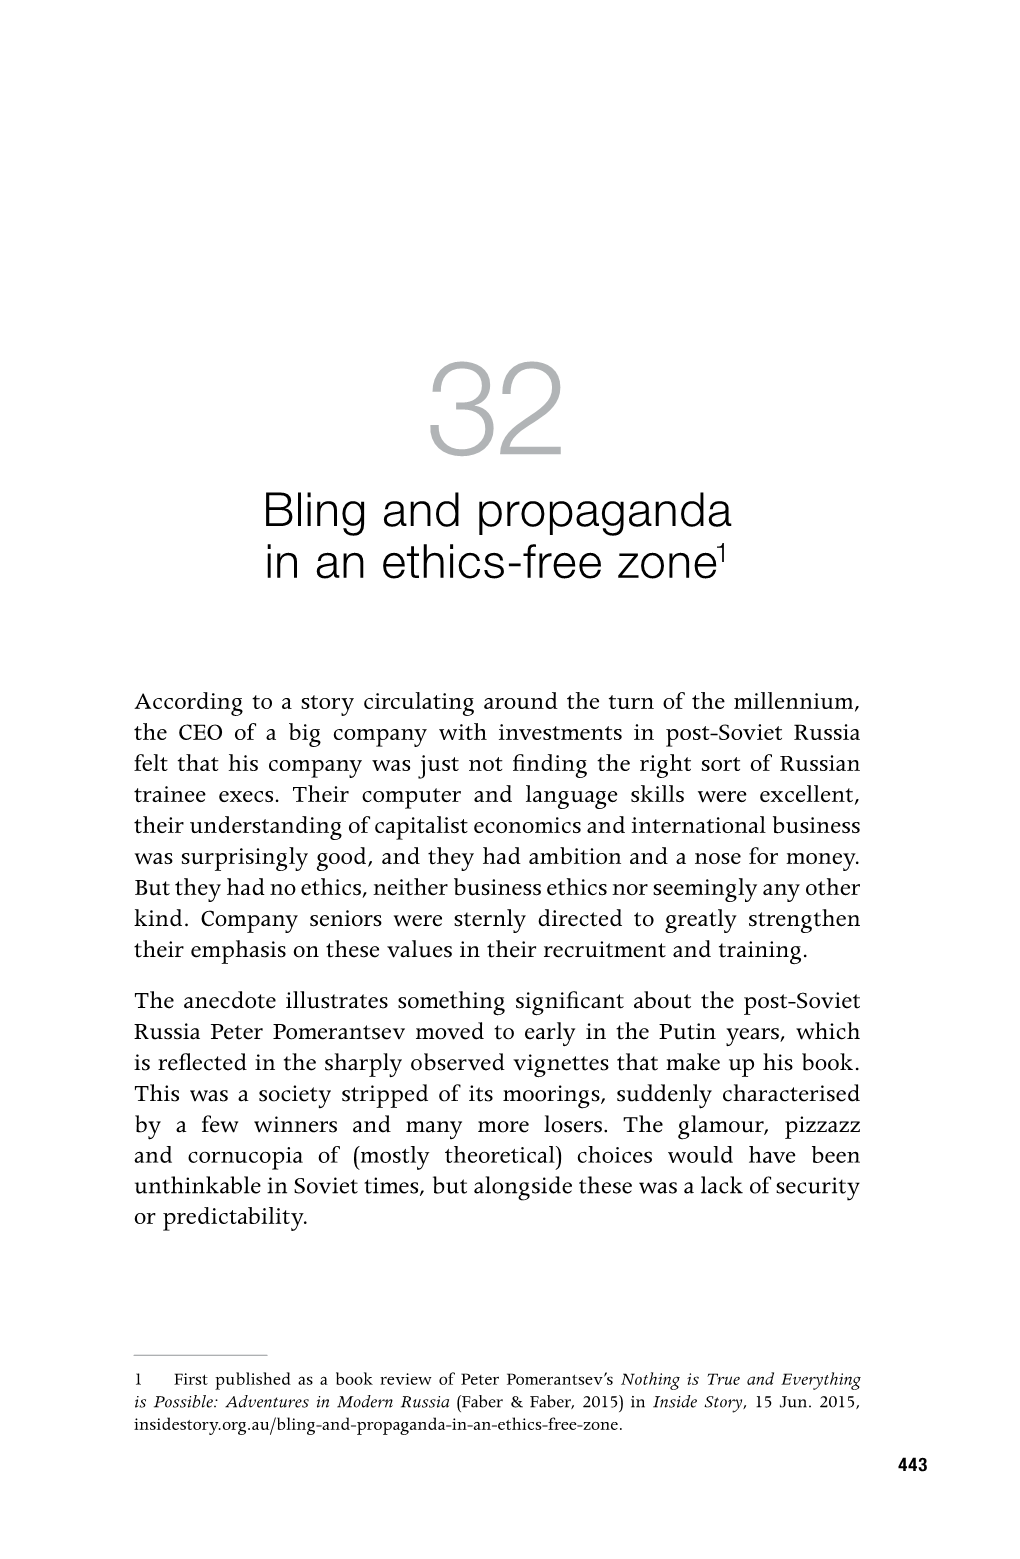 Bling and Propaganda in an Ethics-Free Zone1